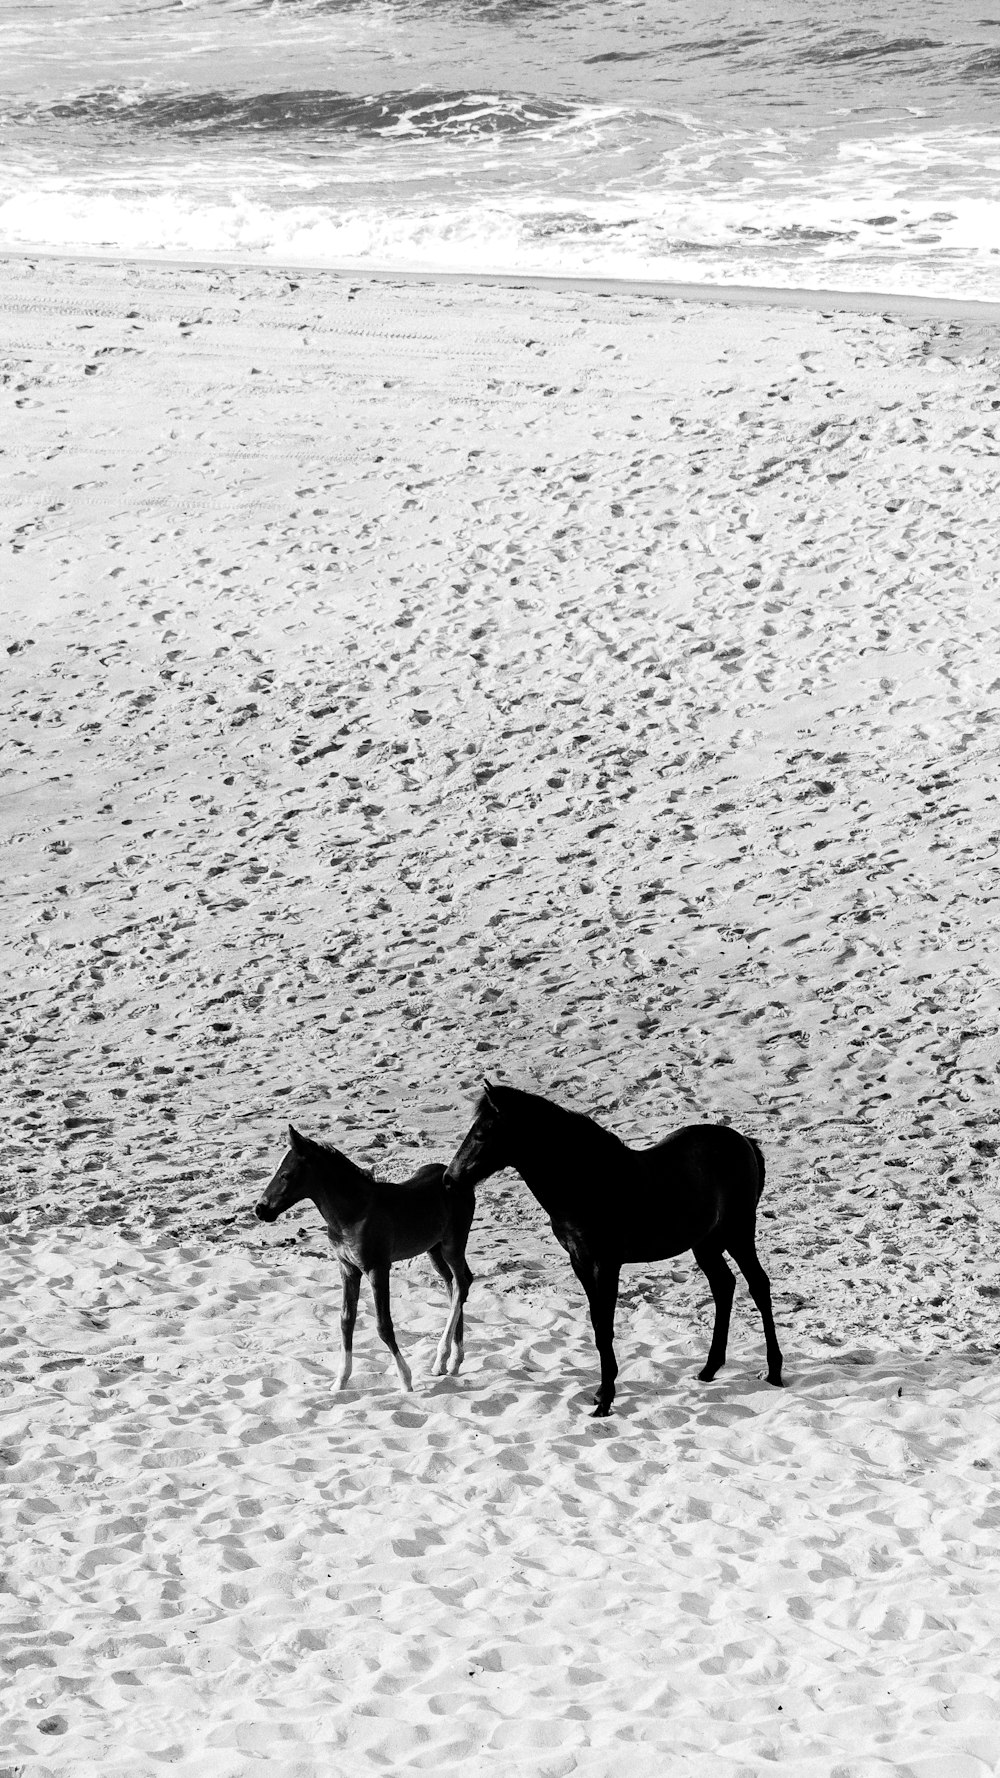 a couple of horses standing on top of a sandy beach